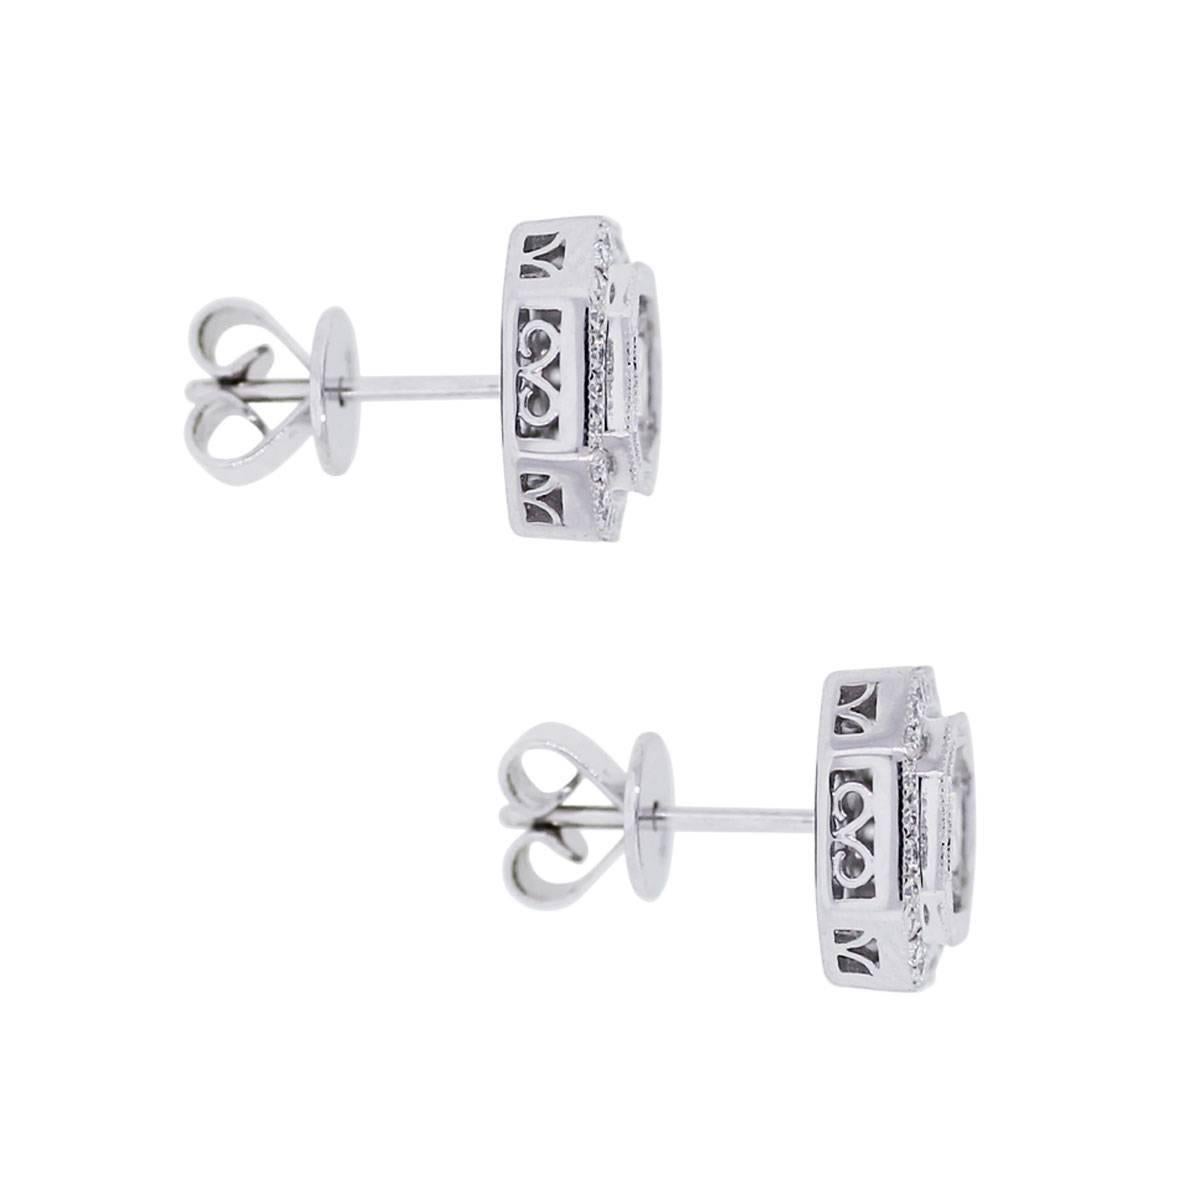 Material: 18k white gold
Diamond Details: Approximately 0.28ctw of princess cut diamonds, 0.24ctw of round brilliant diamonds and 0.35ctw of baguette shape diamonds. Diamonds are F/G in color and SI in clarity
Earring Measurements: 0.40″ x 0.17″ x